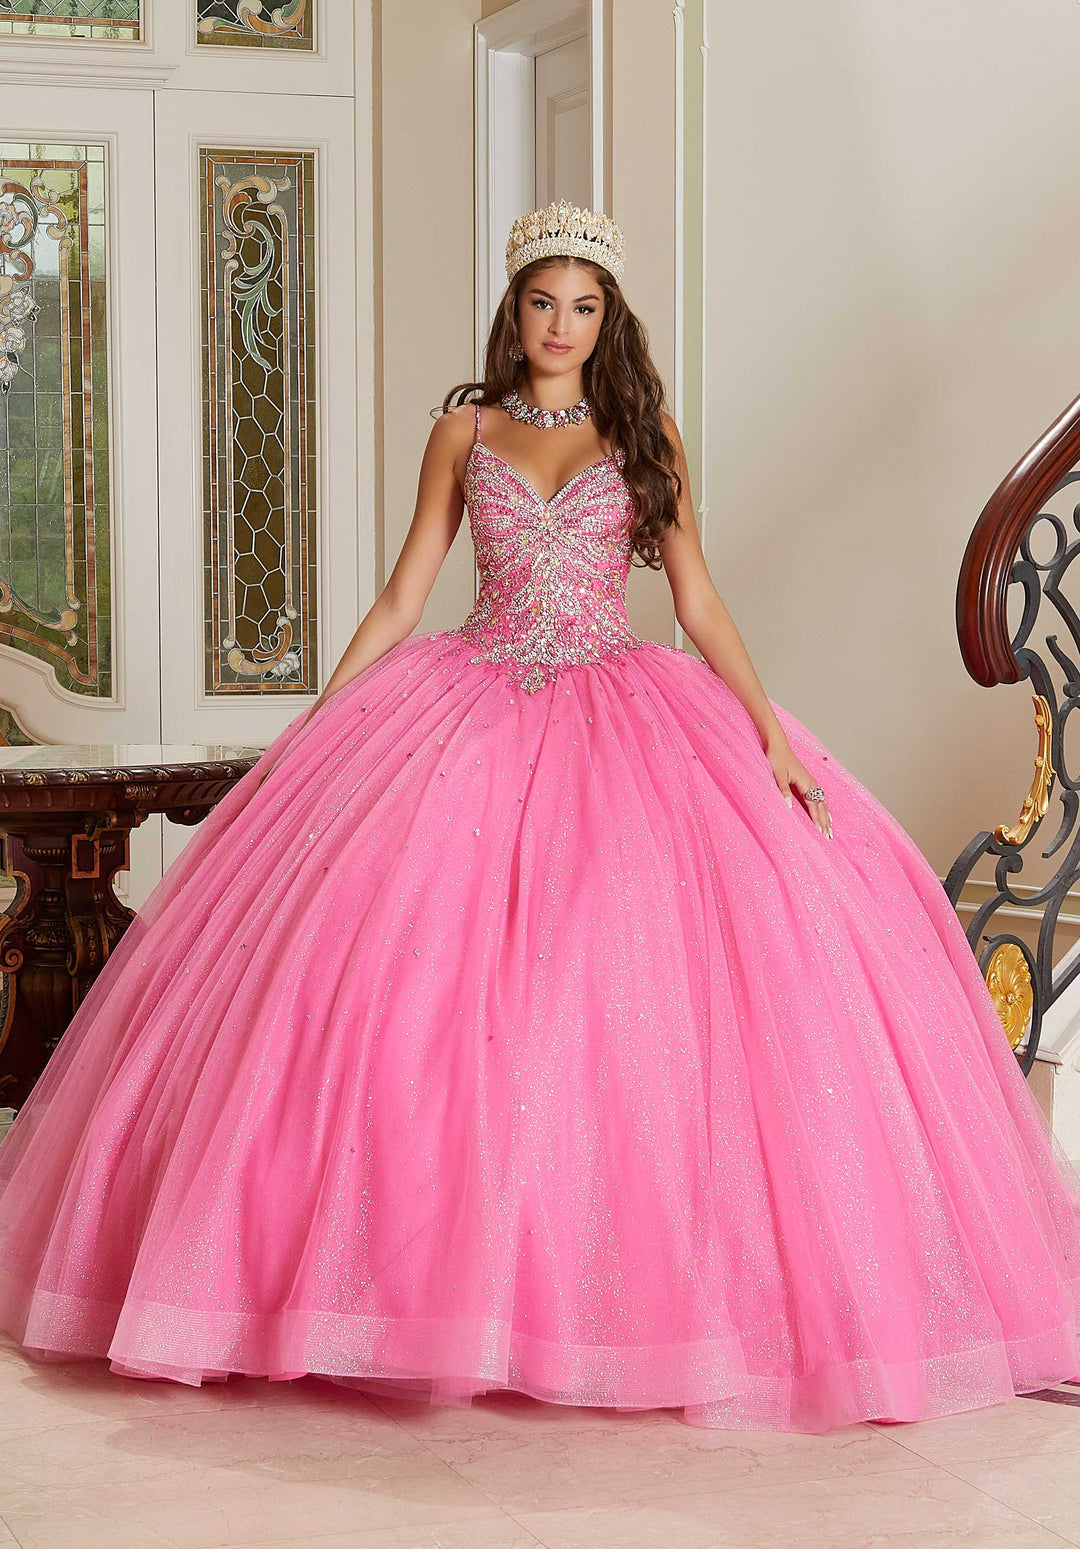 MORILEE #60175 LIPSTICK Rhinestone and Crystal Beaded Quinceañera Dress with Bow